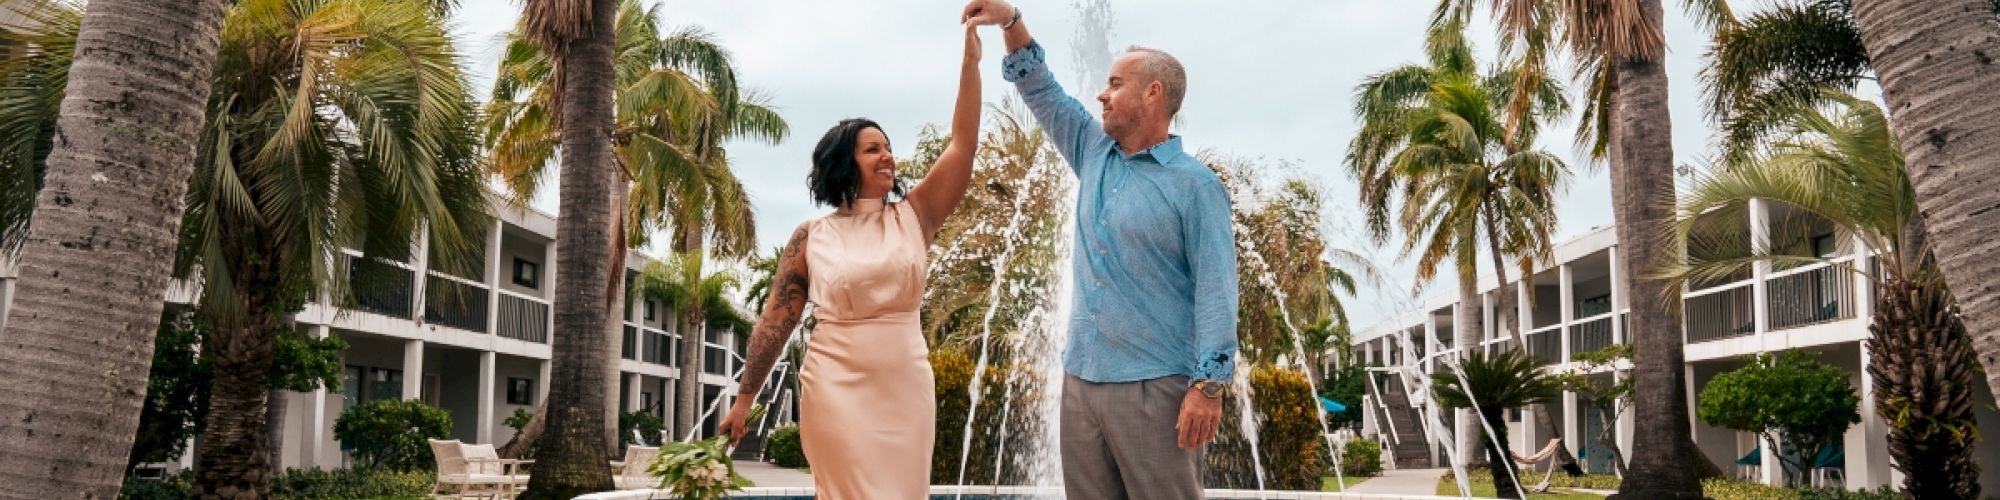 A couple dances in front of a fountain surrounded by palm trees and a building in the background, both smiling and holding hands, ending the sentence.